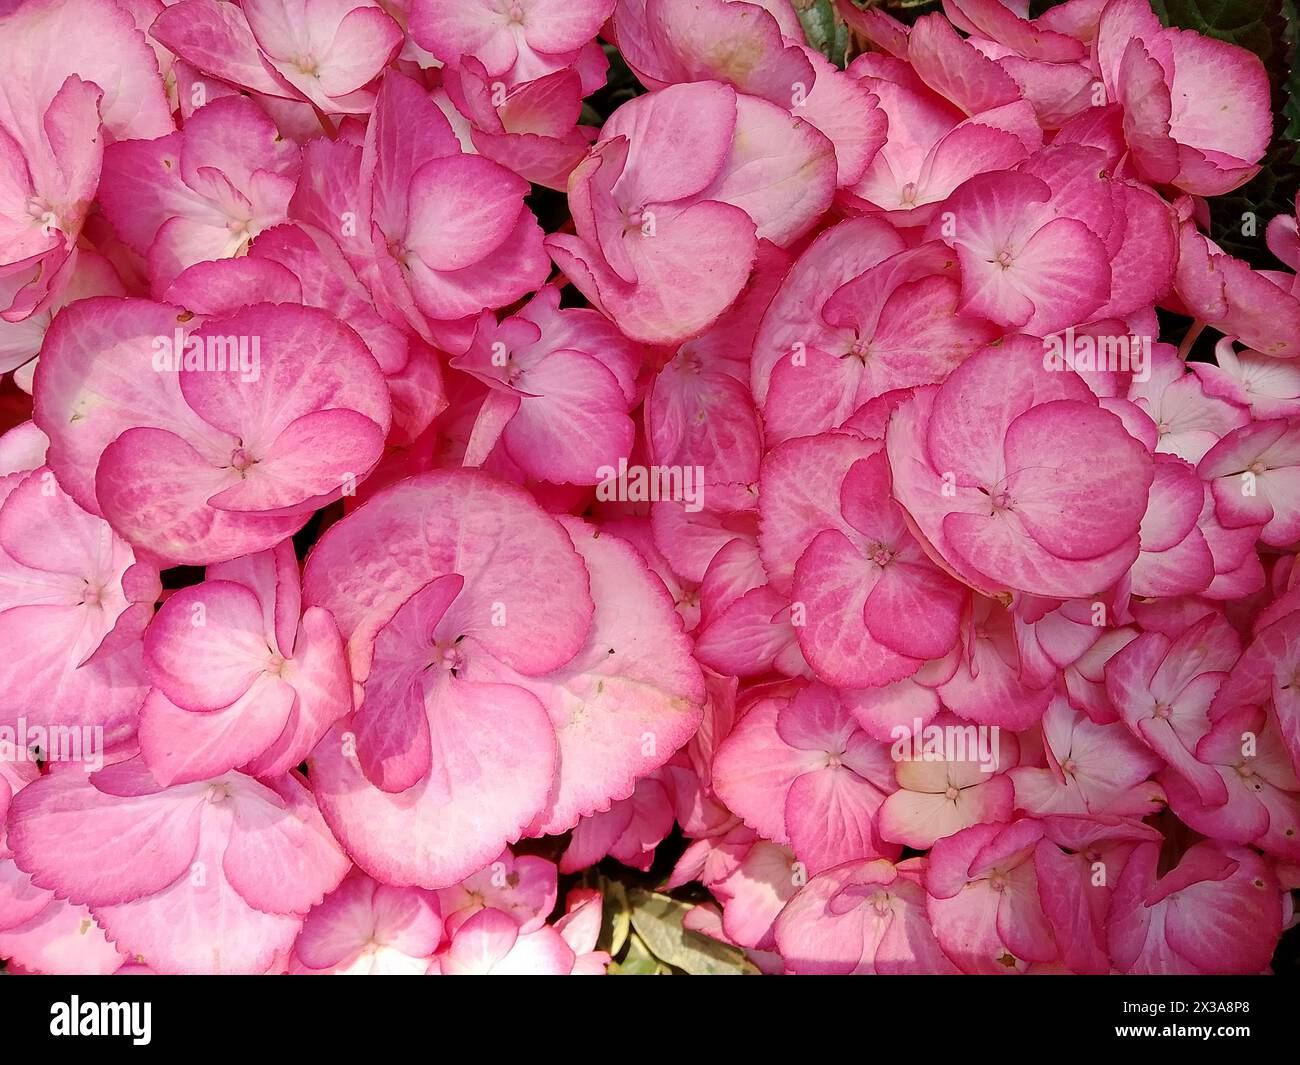 A stunning close-up of a lush hydrangea flower head bursting with tightly clustered, vividly pink petals that create a full, rounded shape. The deep g Stock Photo